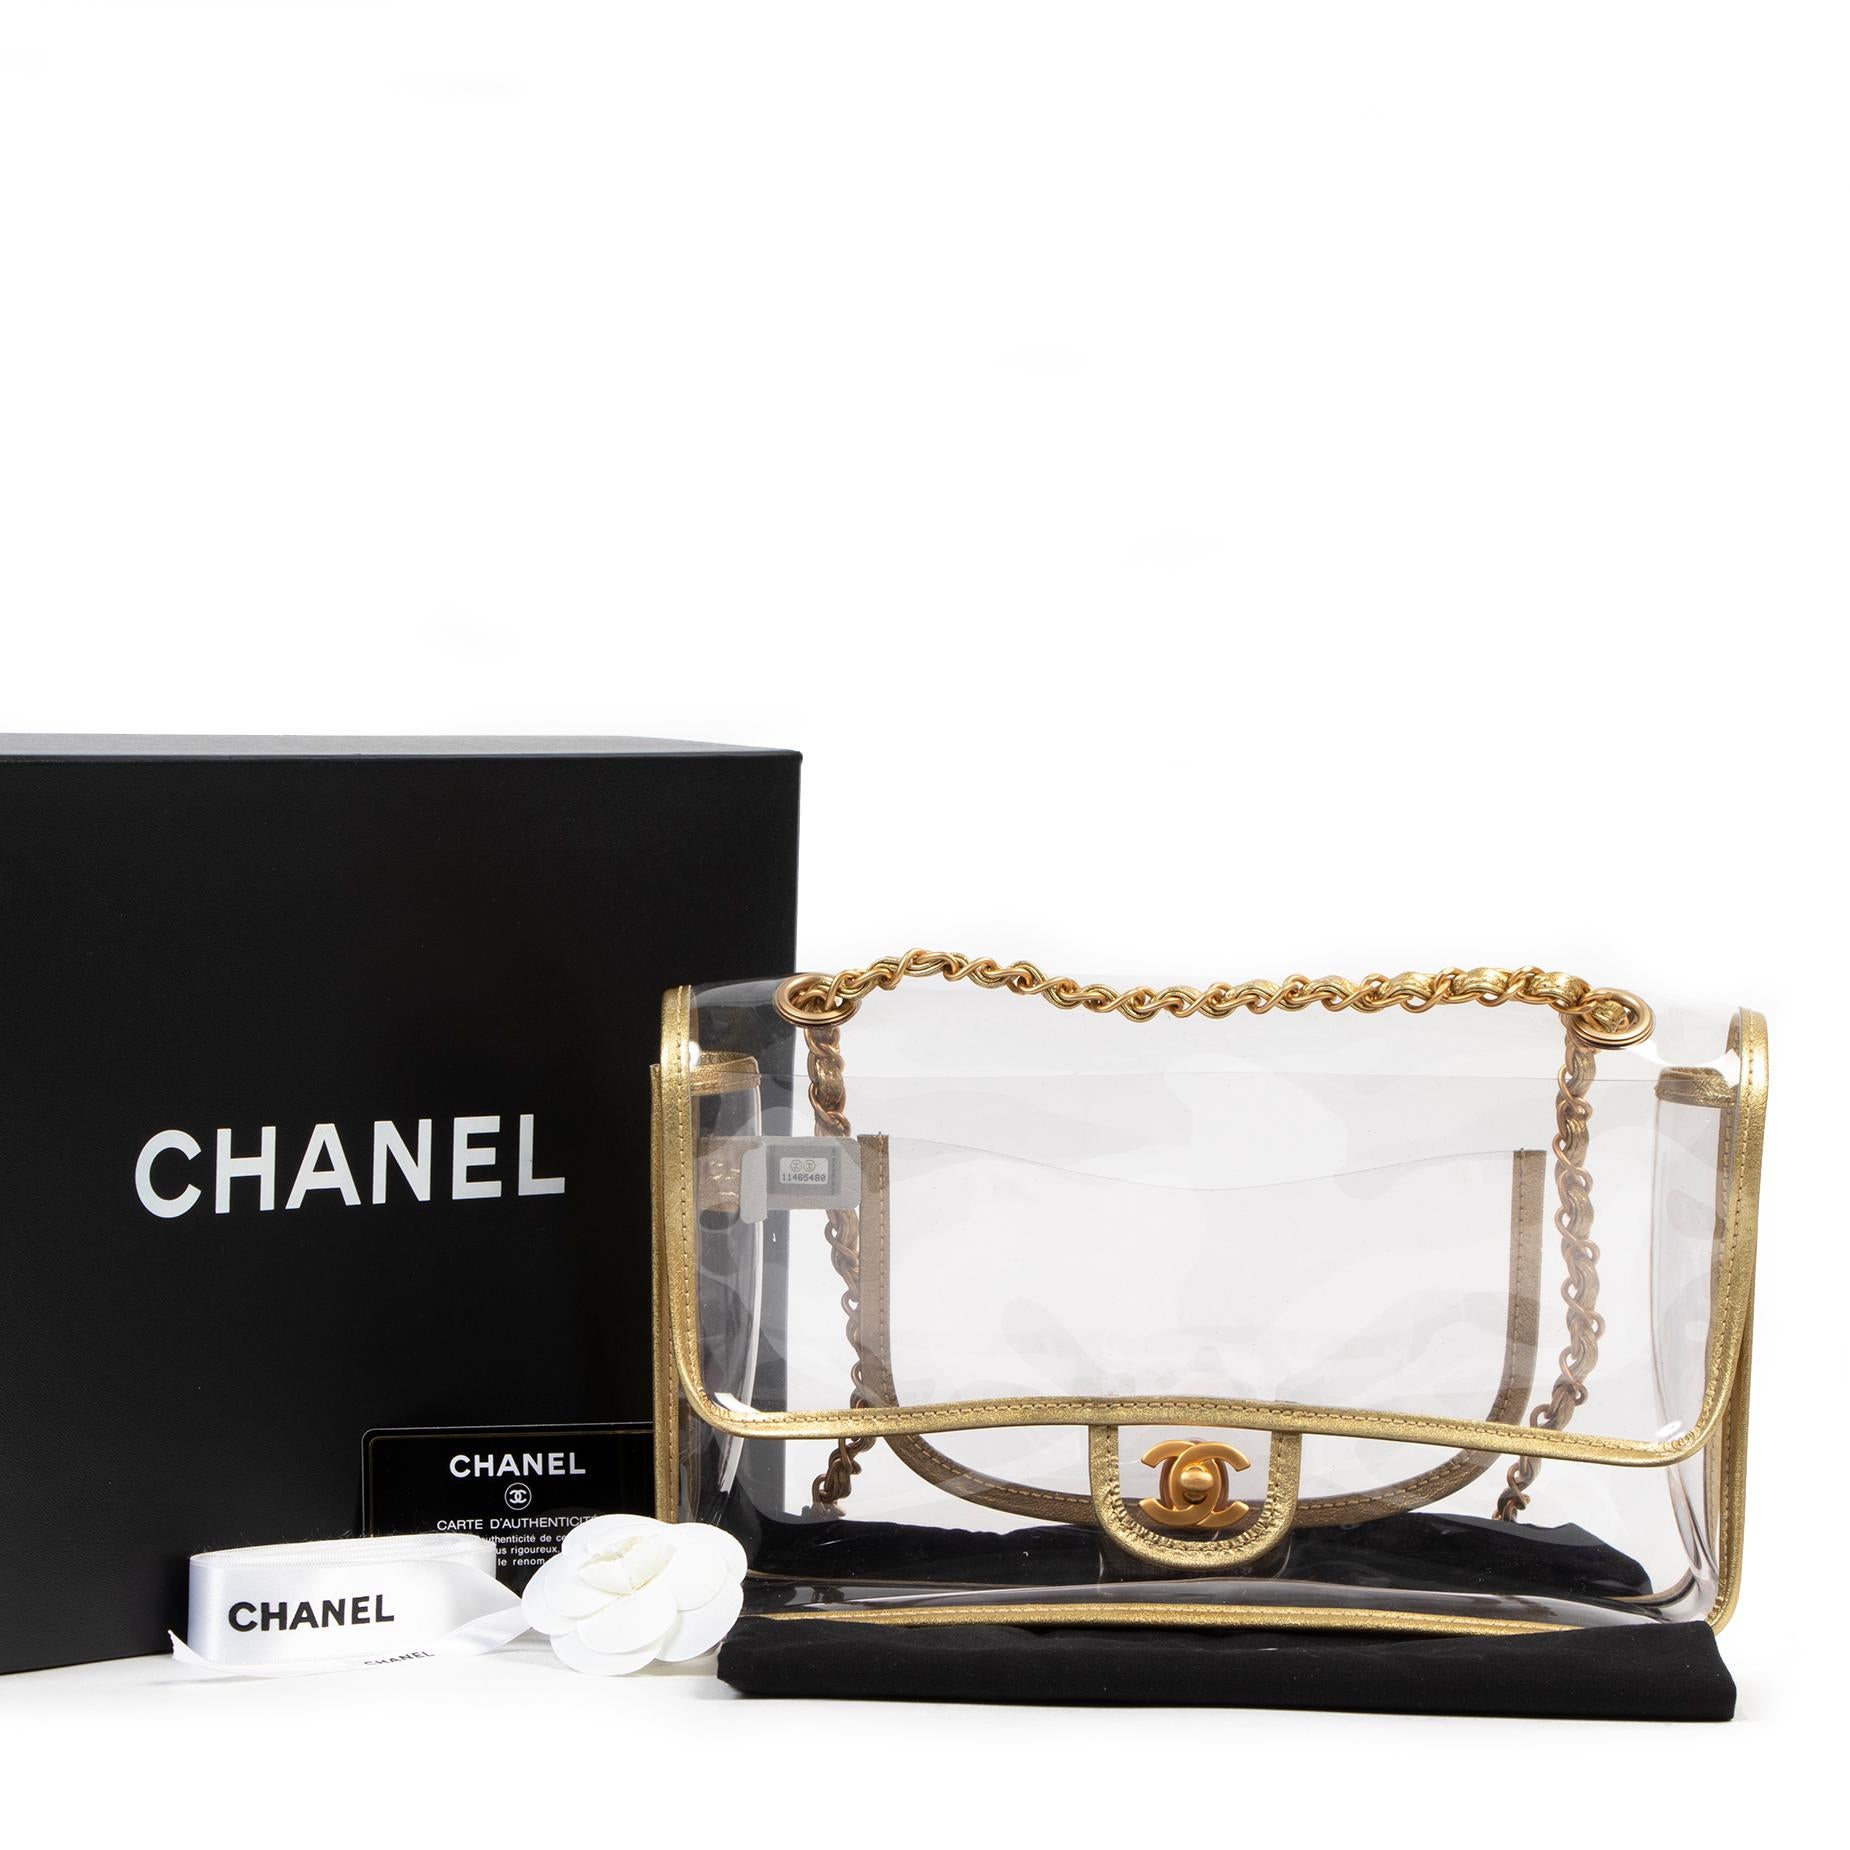 As New

As New Chanel Limited PVC Classic Flap Bag

WOW make heads turn with this limited Chanel Transparent Classic Medium Flap Bag finished with metallic gold lambskin piping.
The front matt gold cc lock opens with a front flap to a spacious